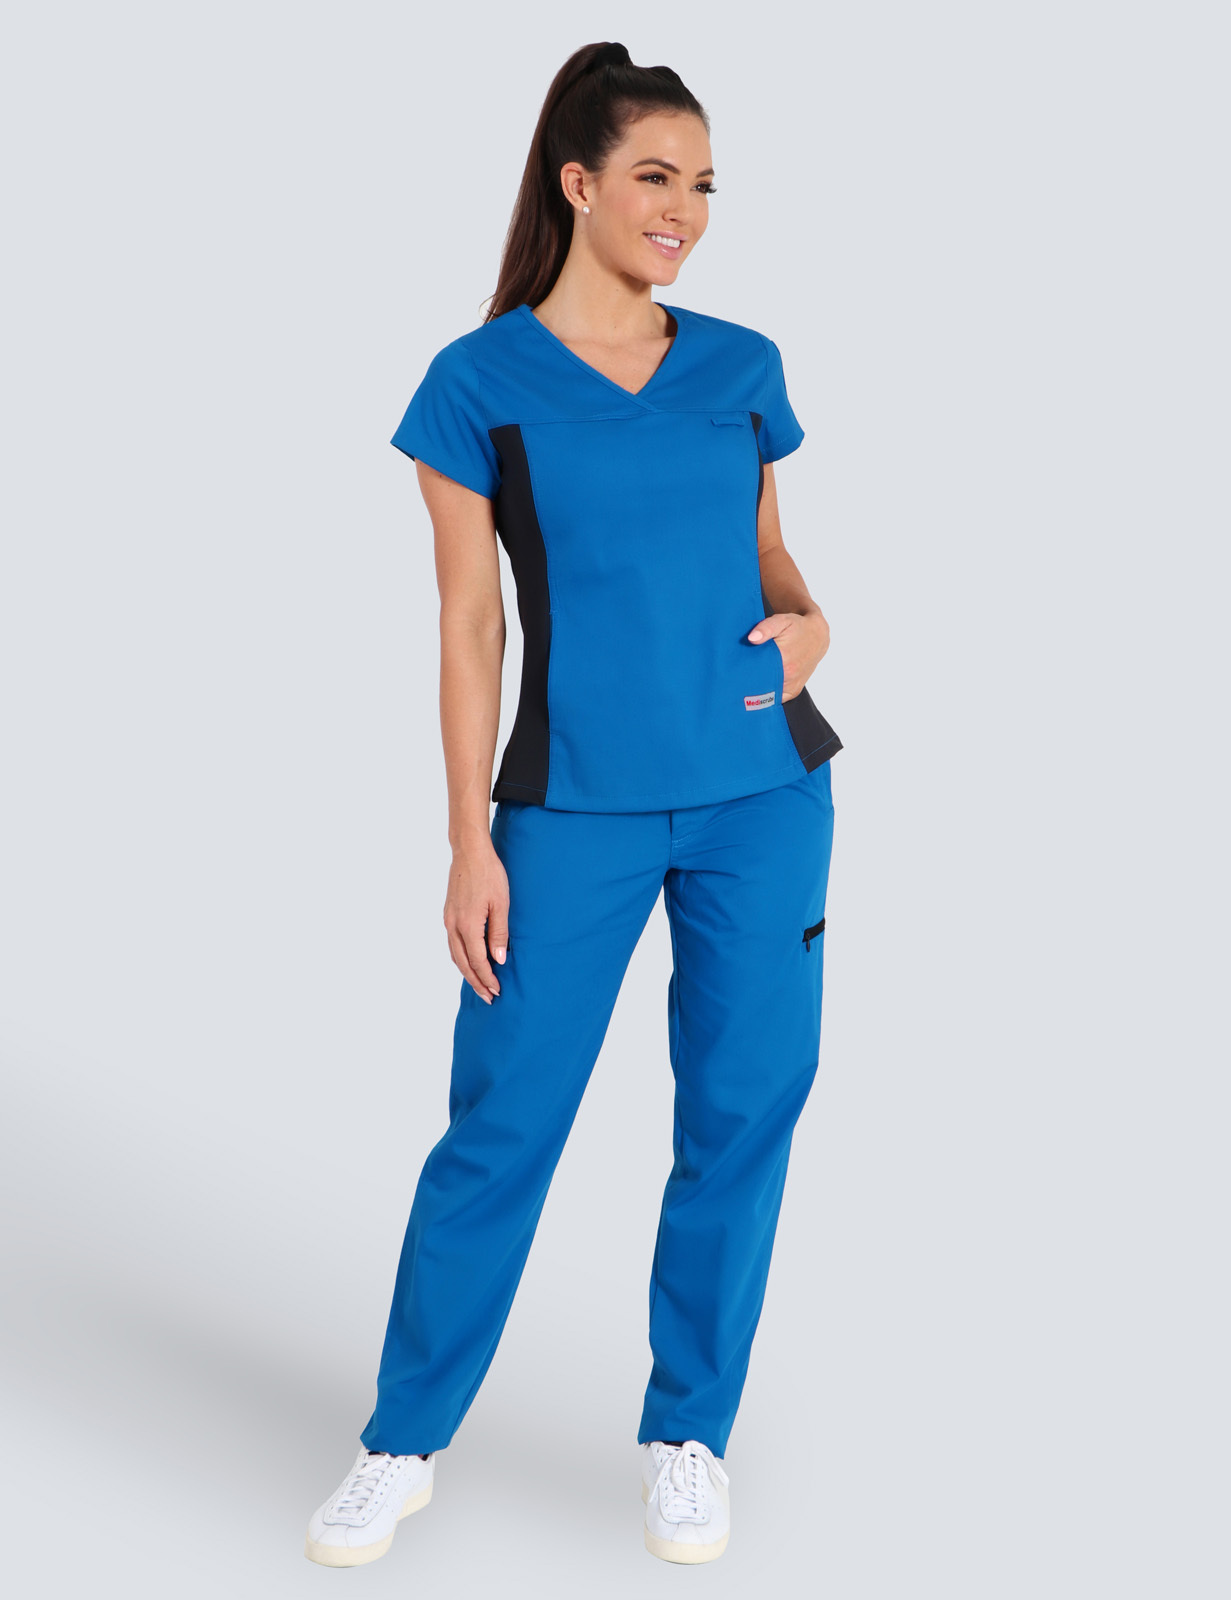 Pathology North (Women's Fit Spandex Scrub Top and Cargo Pants in Black incl Logos)